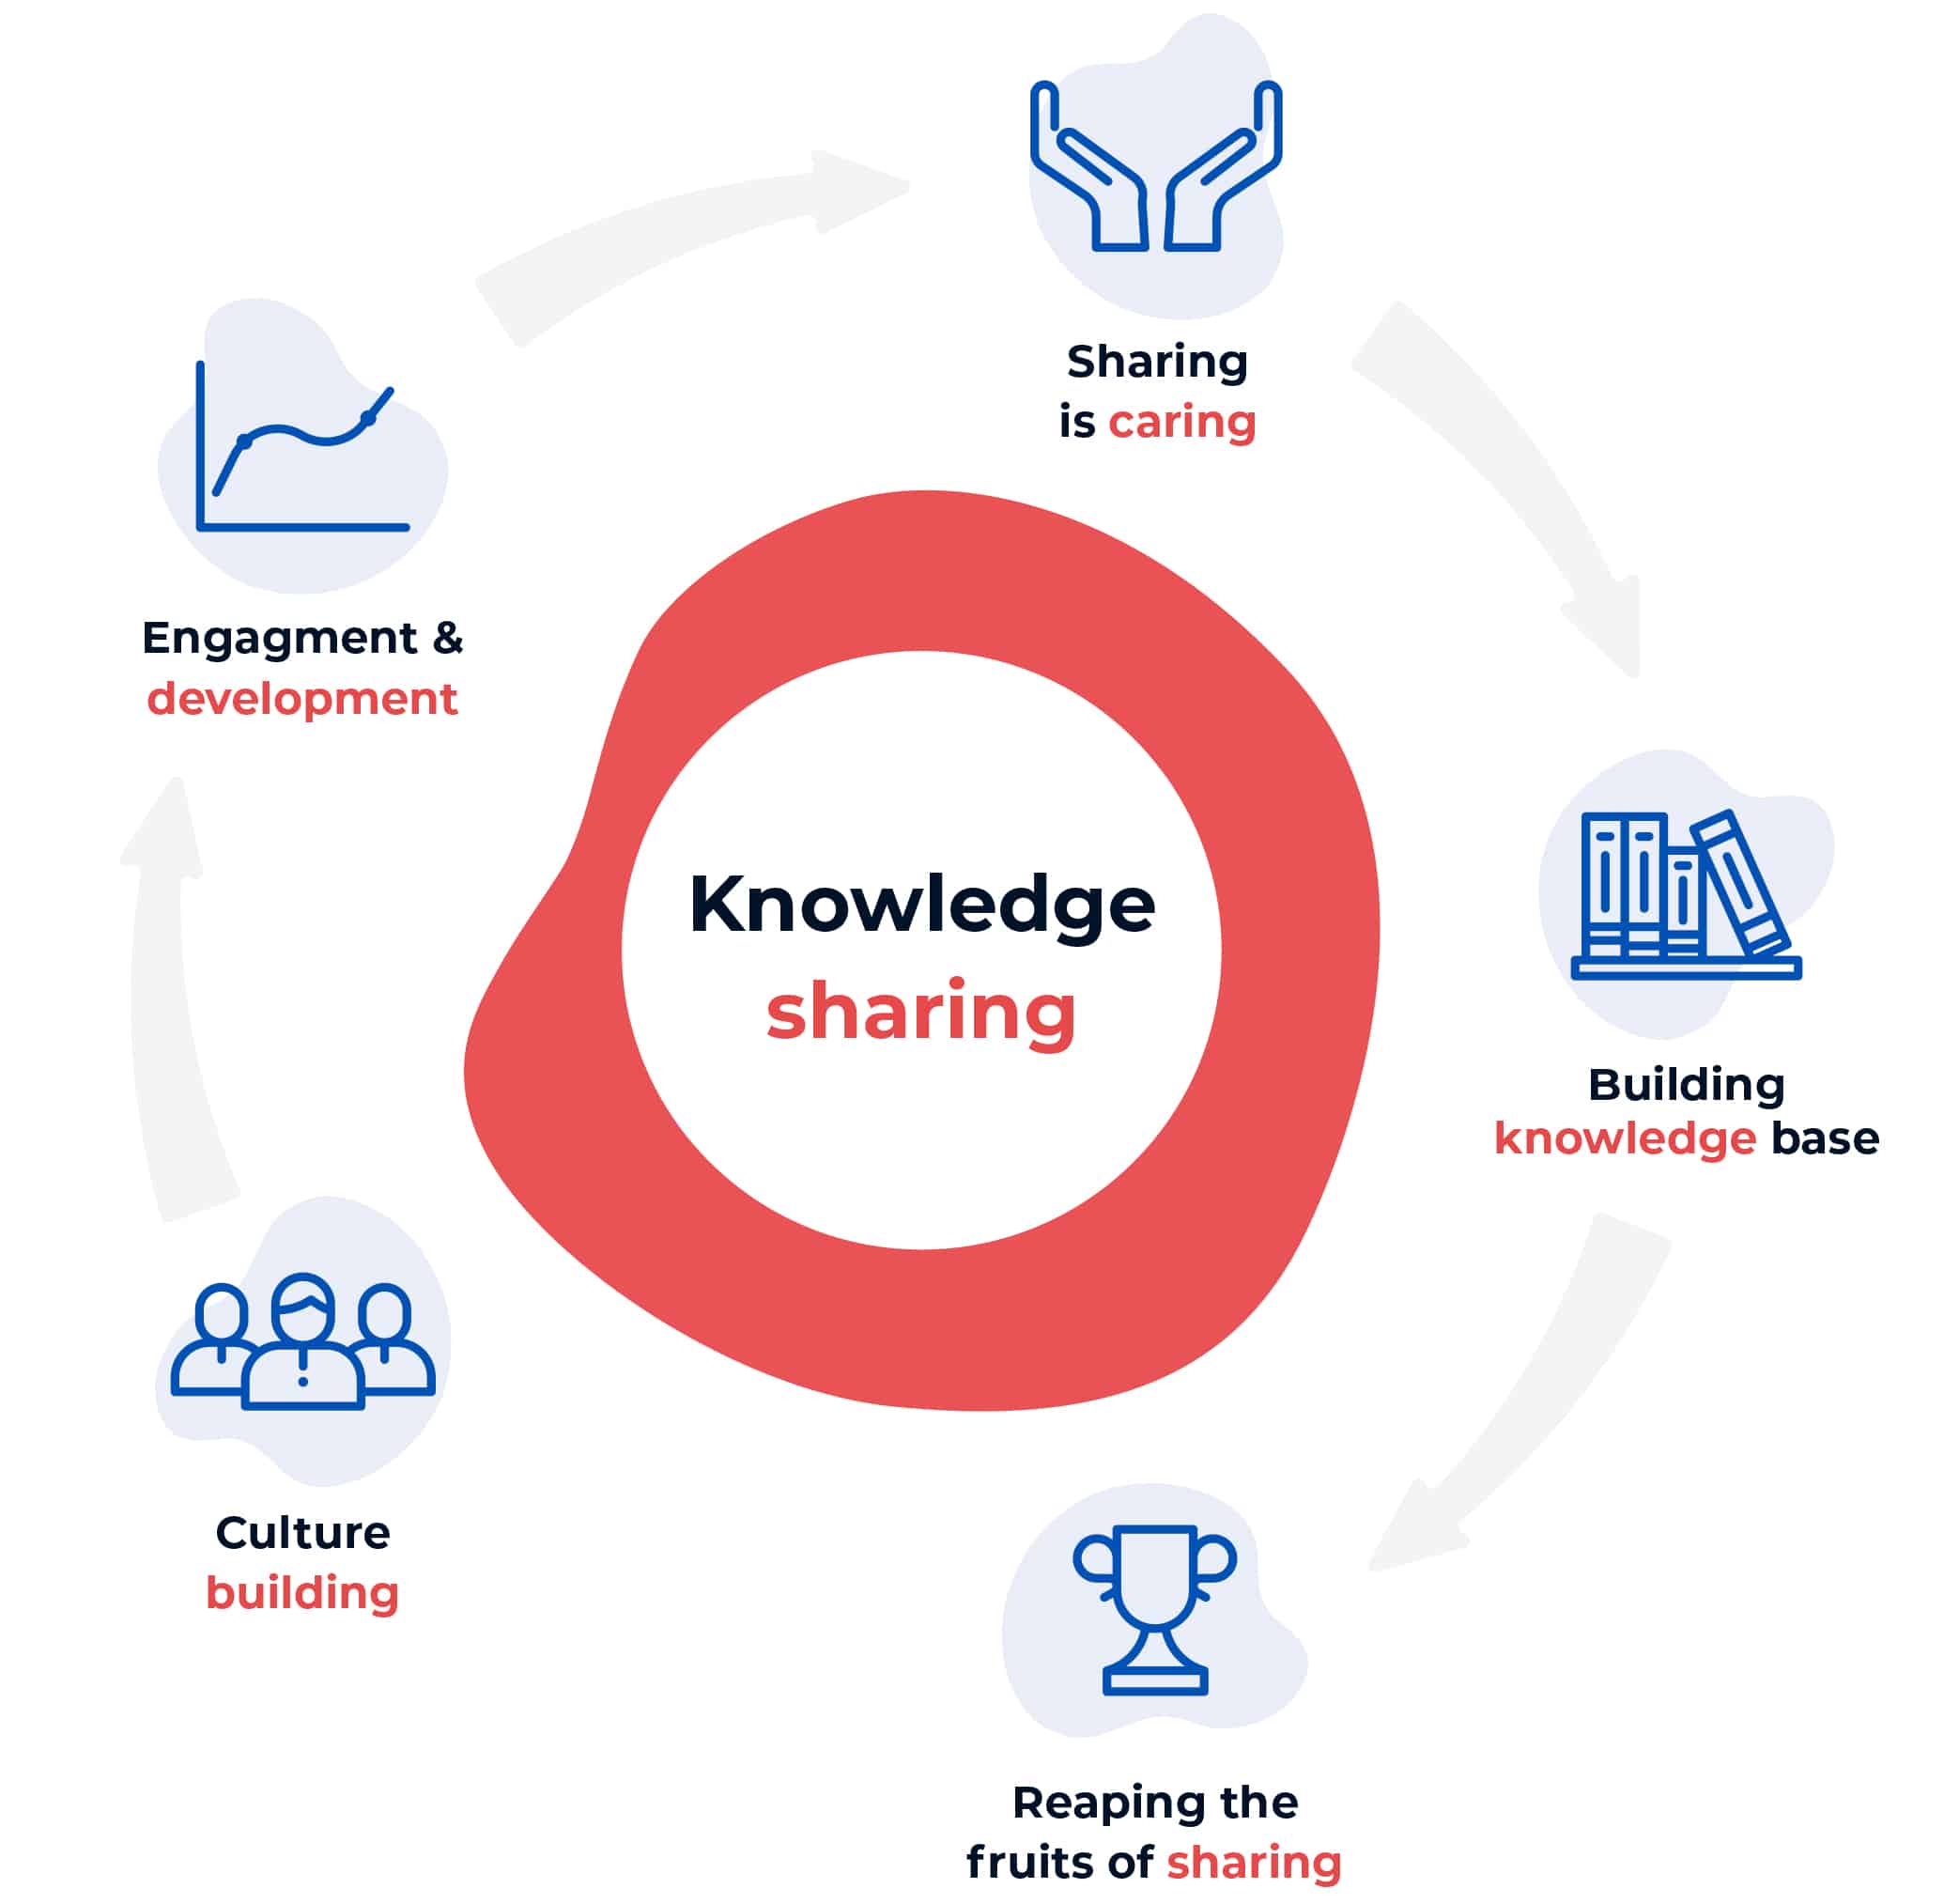 Benefits of knowledge sharing